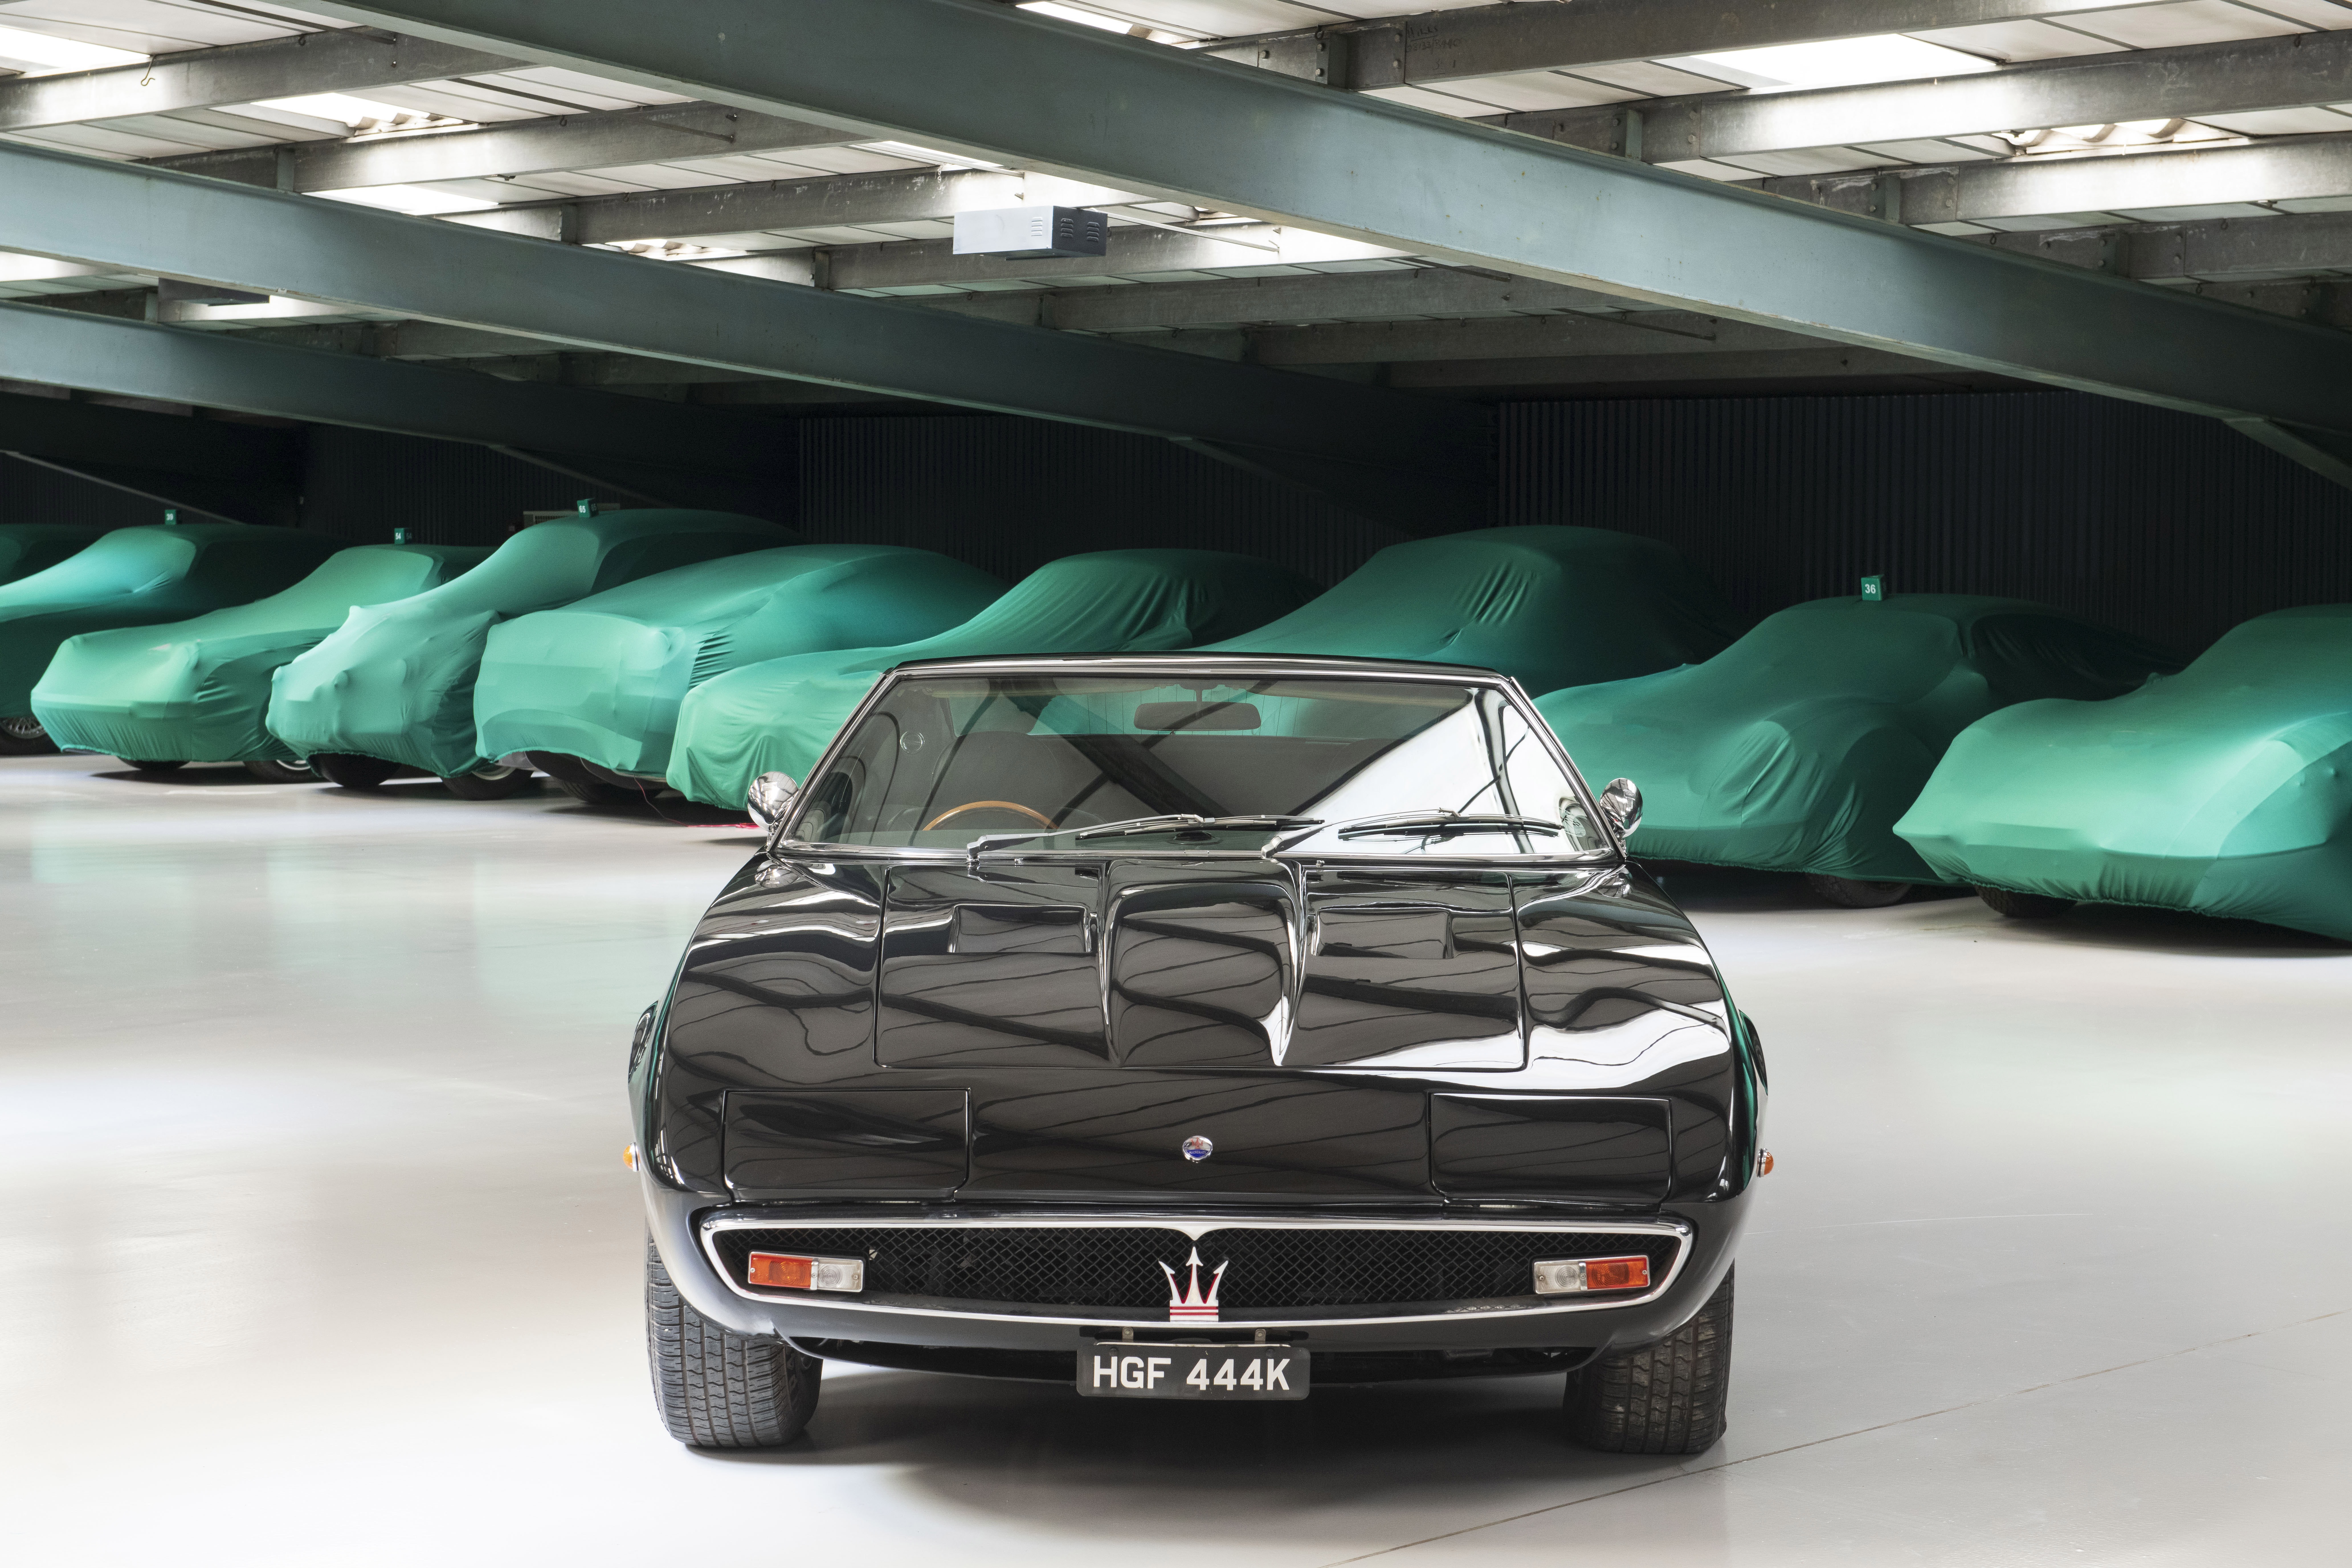 Offered from The Chester Collection,1972 Maserati Ghibli SS 4.9-Litre Coupé Chassis no. AM115/49...